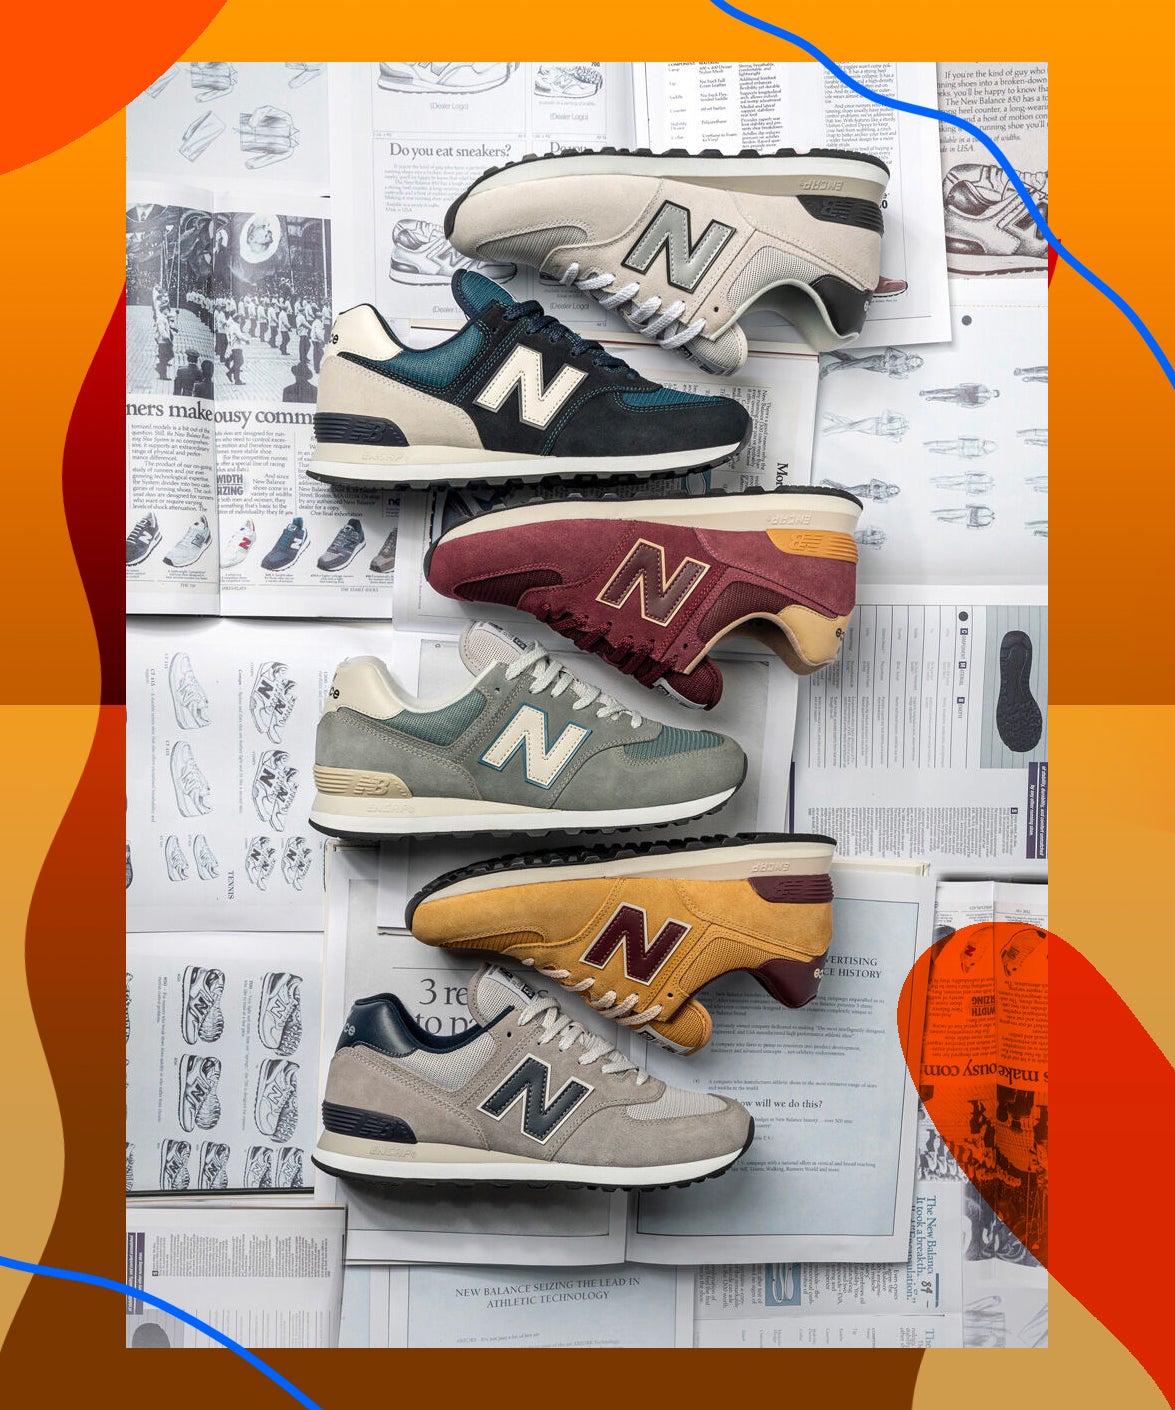 The Best New Balance Sneakers According To User Reviews